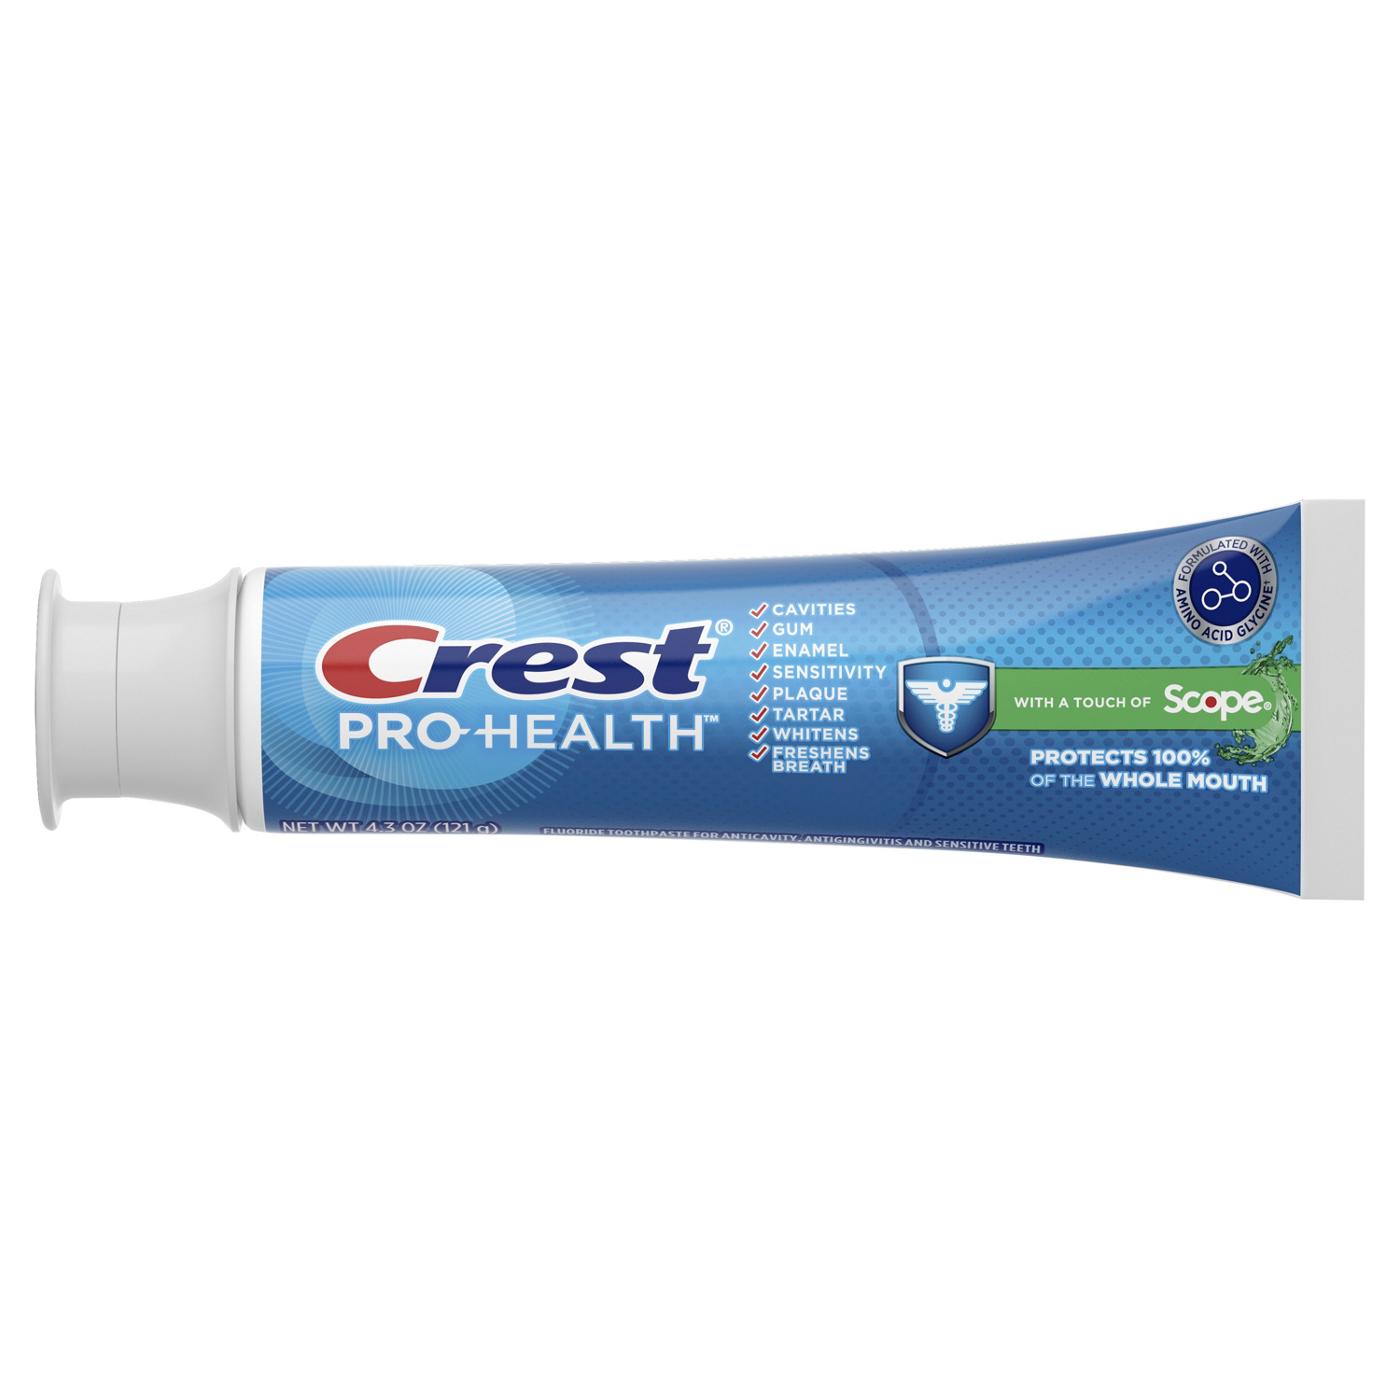 Crest Pro-Health with a Touch of Scope Gel Toothpaste; image 10 of 10